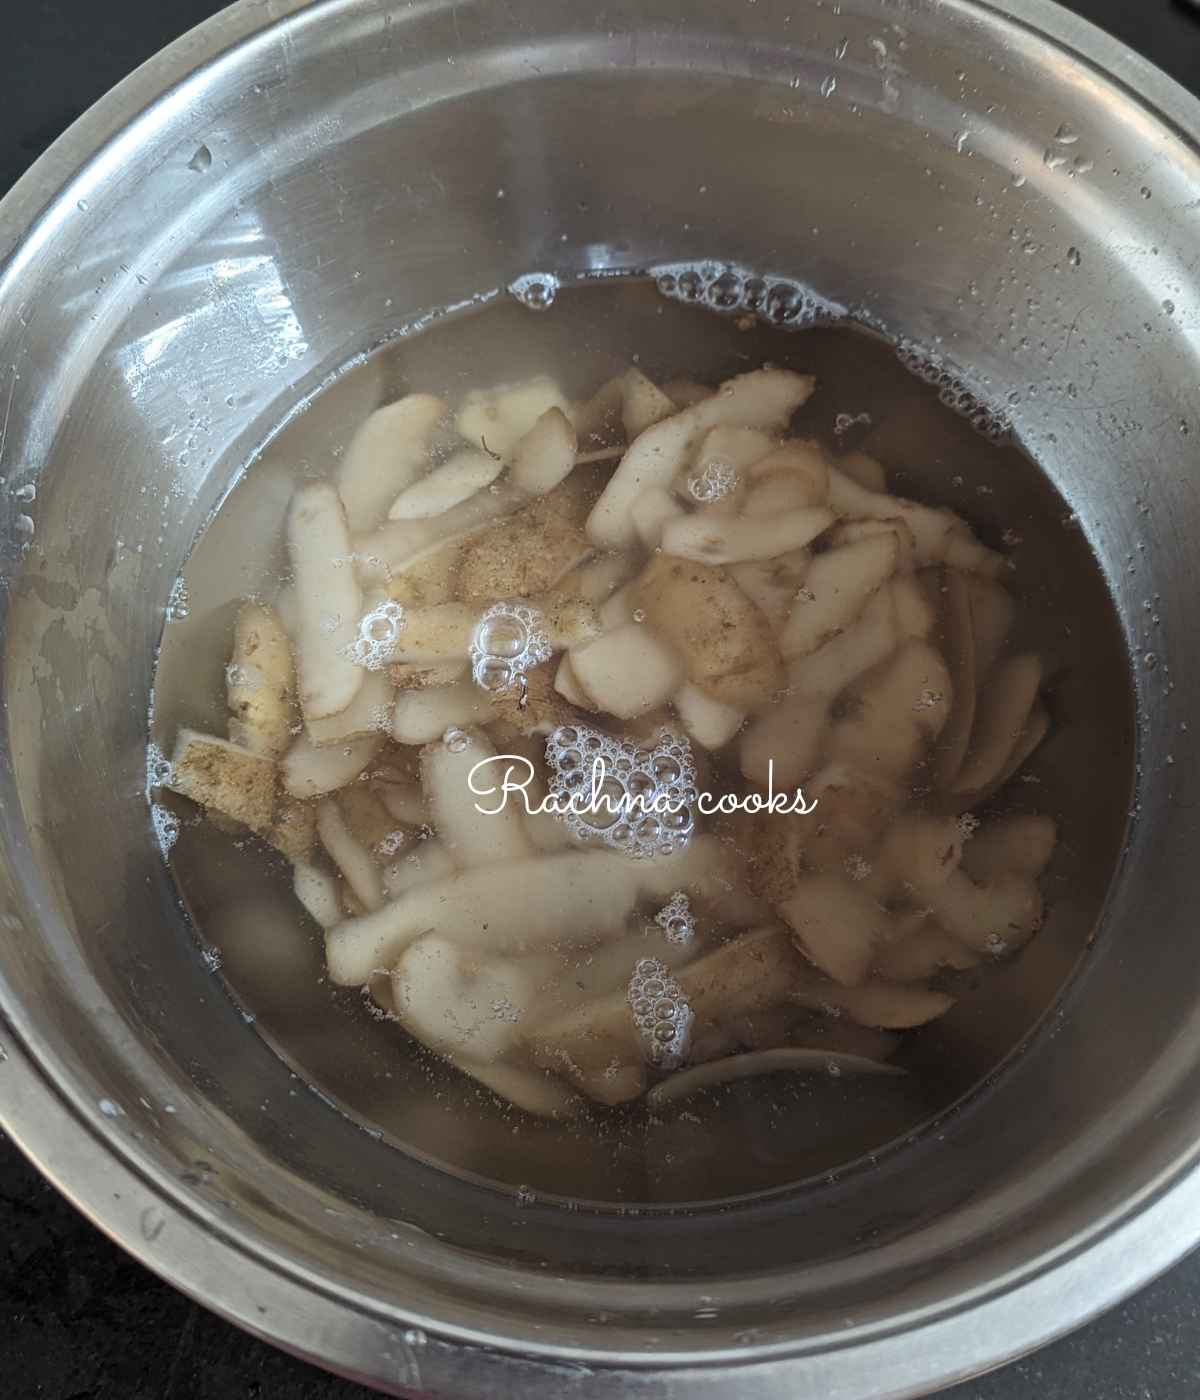 Potato peels after washing in a bowl